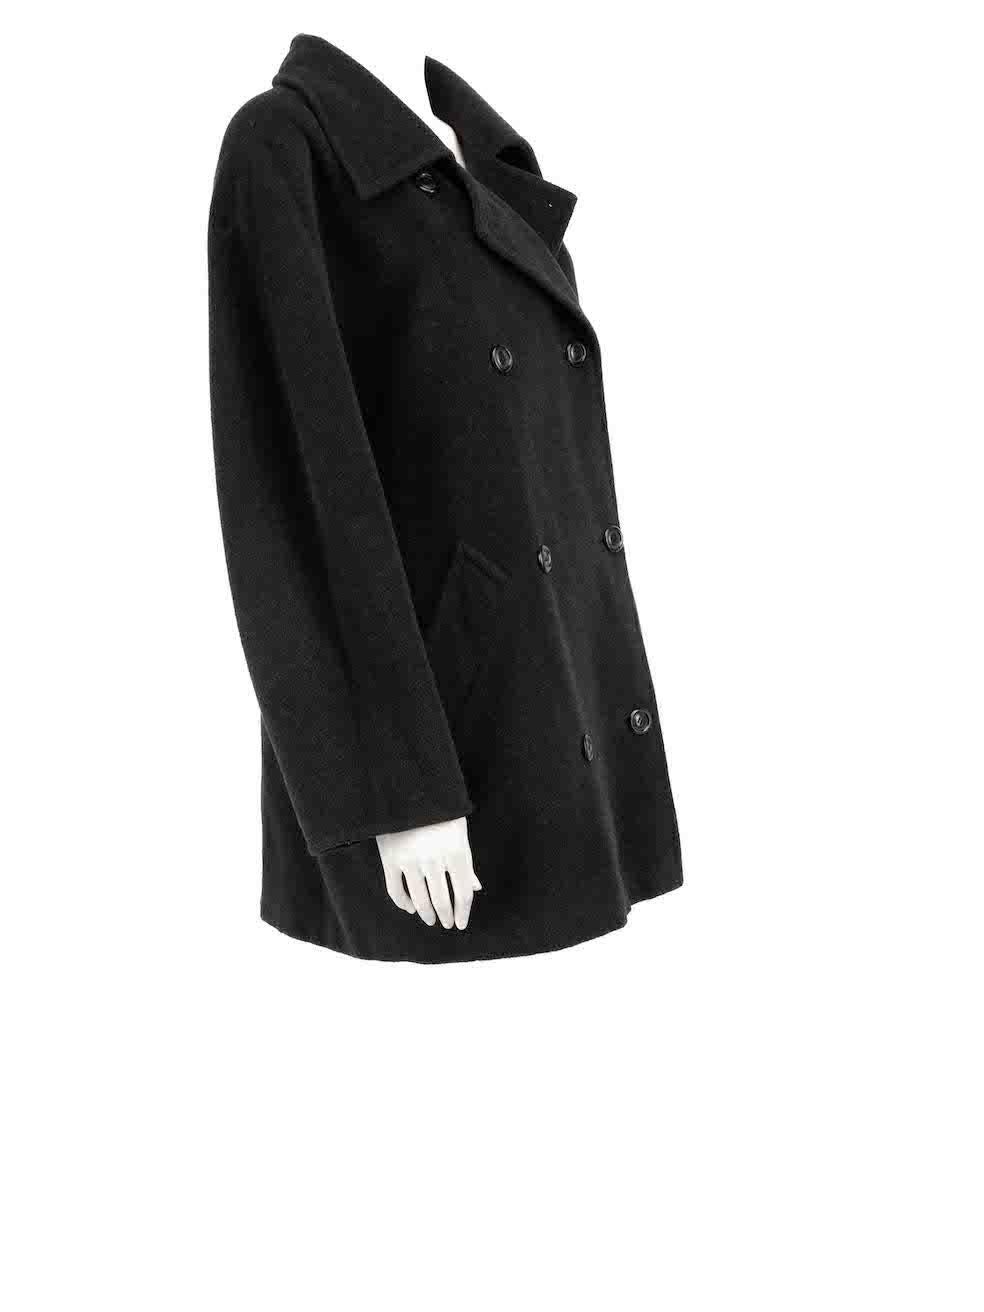 CONDITION is Good. Minor wear to coat is evident. Some small plucks to the weave and some abrasions to the wool collar on this used Max Mara designer resale item.
 
Details
Dark grey
Wool
Coat
Oversized fit
Double breasted
Button fastening
2x Side